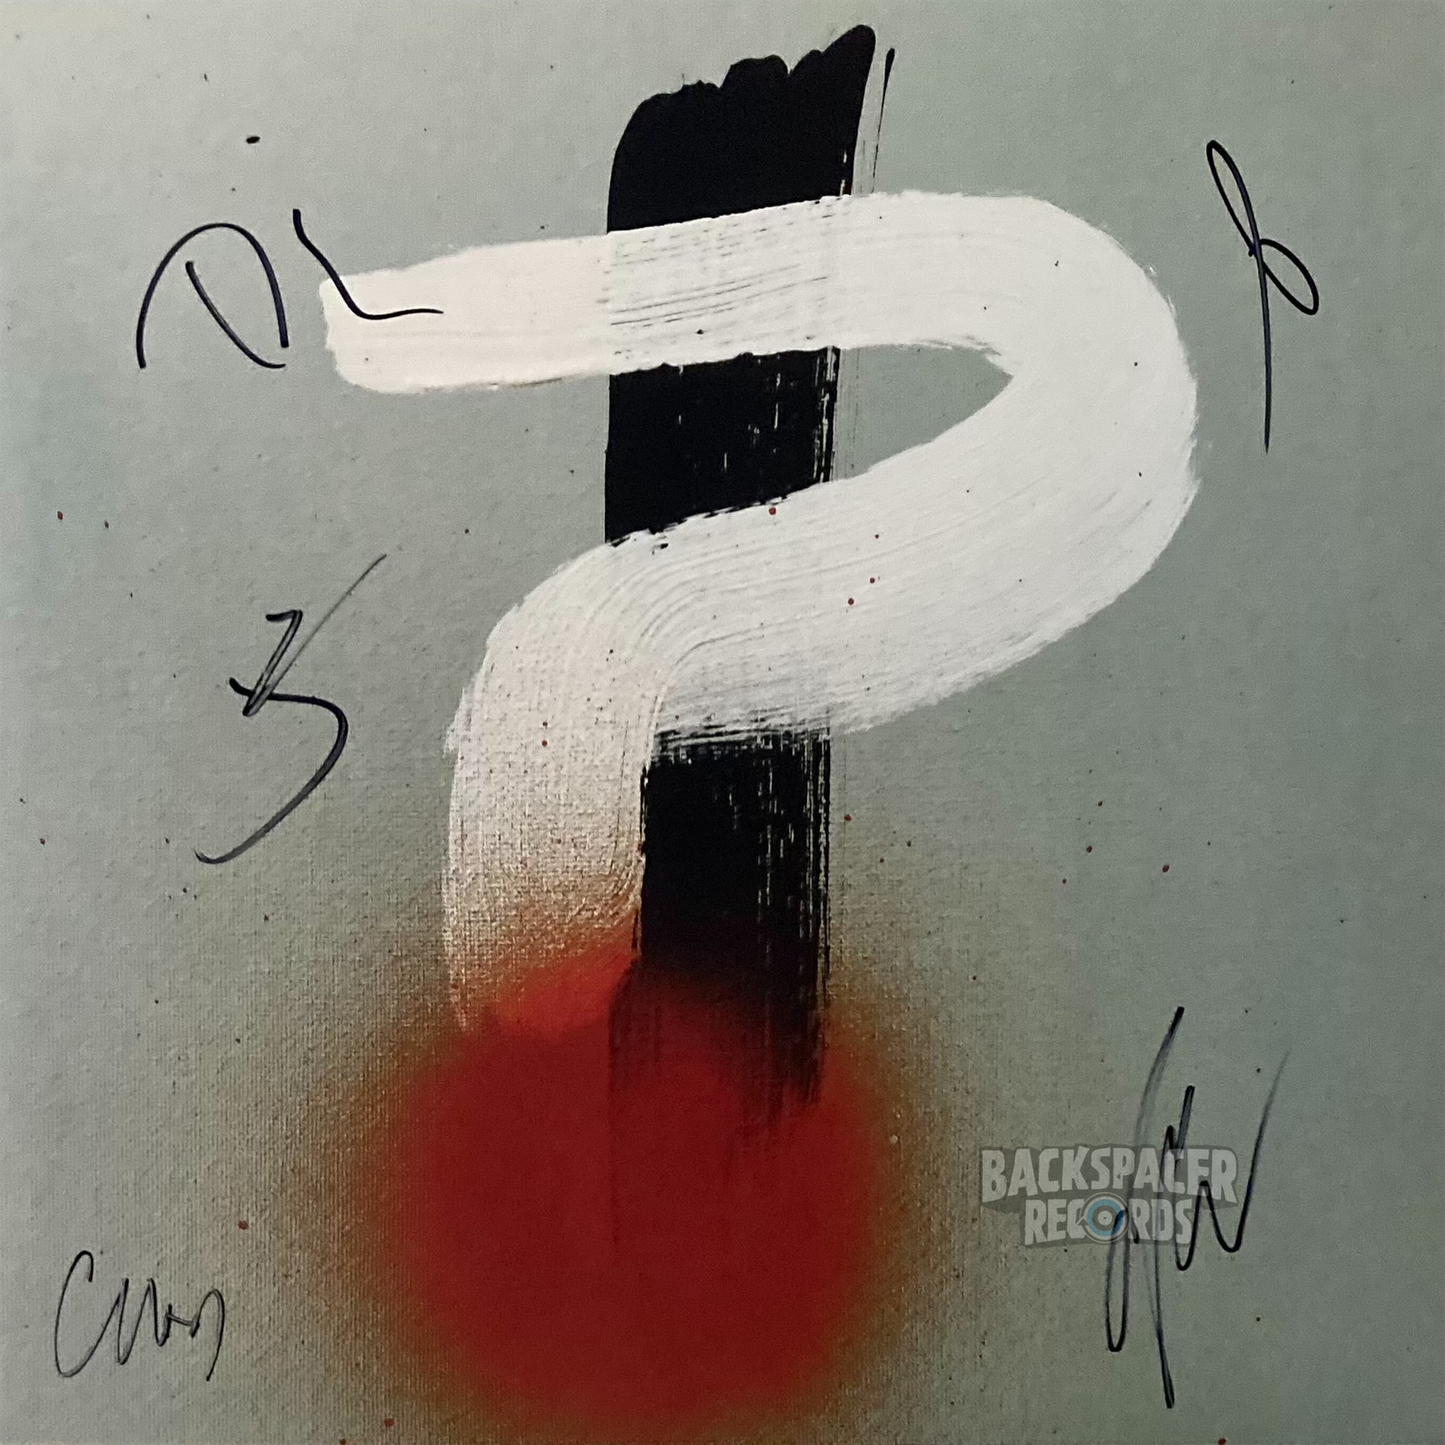 Switchfoot - Interrobang LP (Limited Edition Autographed)